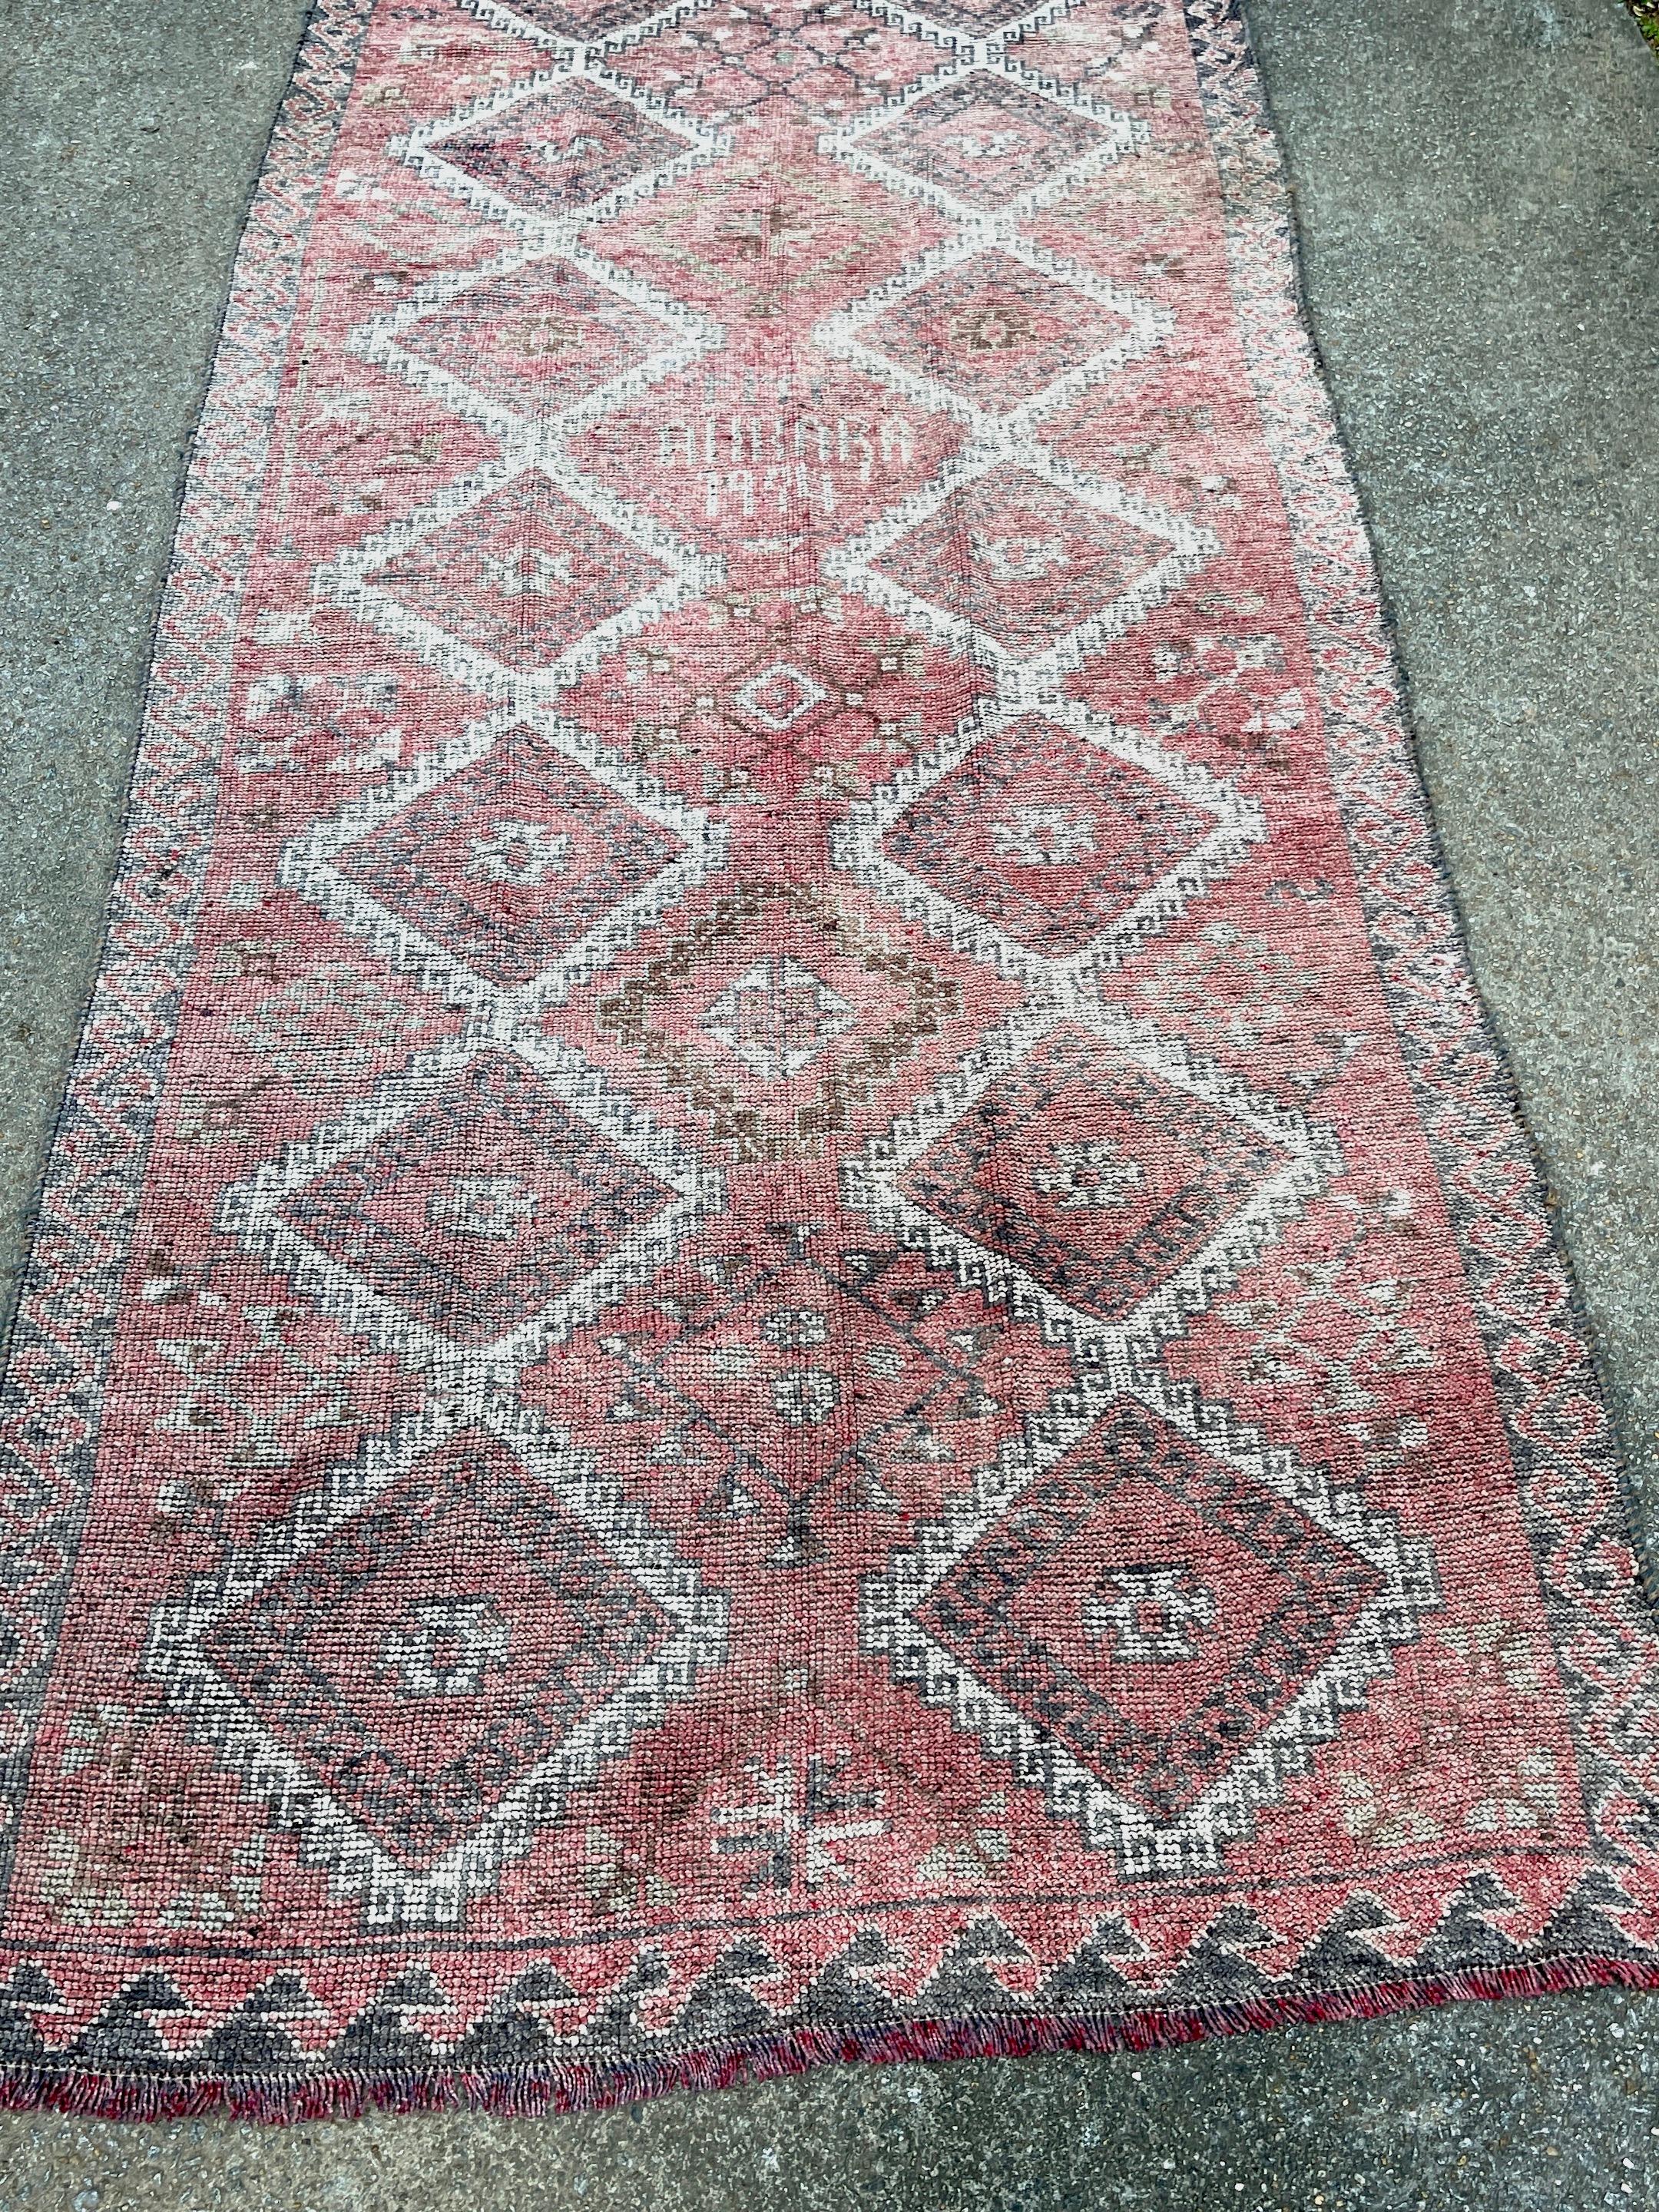 Distressed Hand-Knotted Wool Caucasian Rug 'Reservable' Signed & Dated 1994 In Good Condition For Sale In West Palm Beach, FL